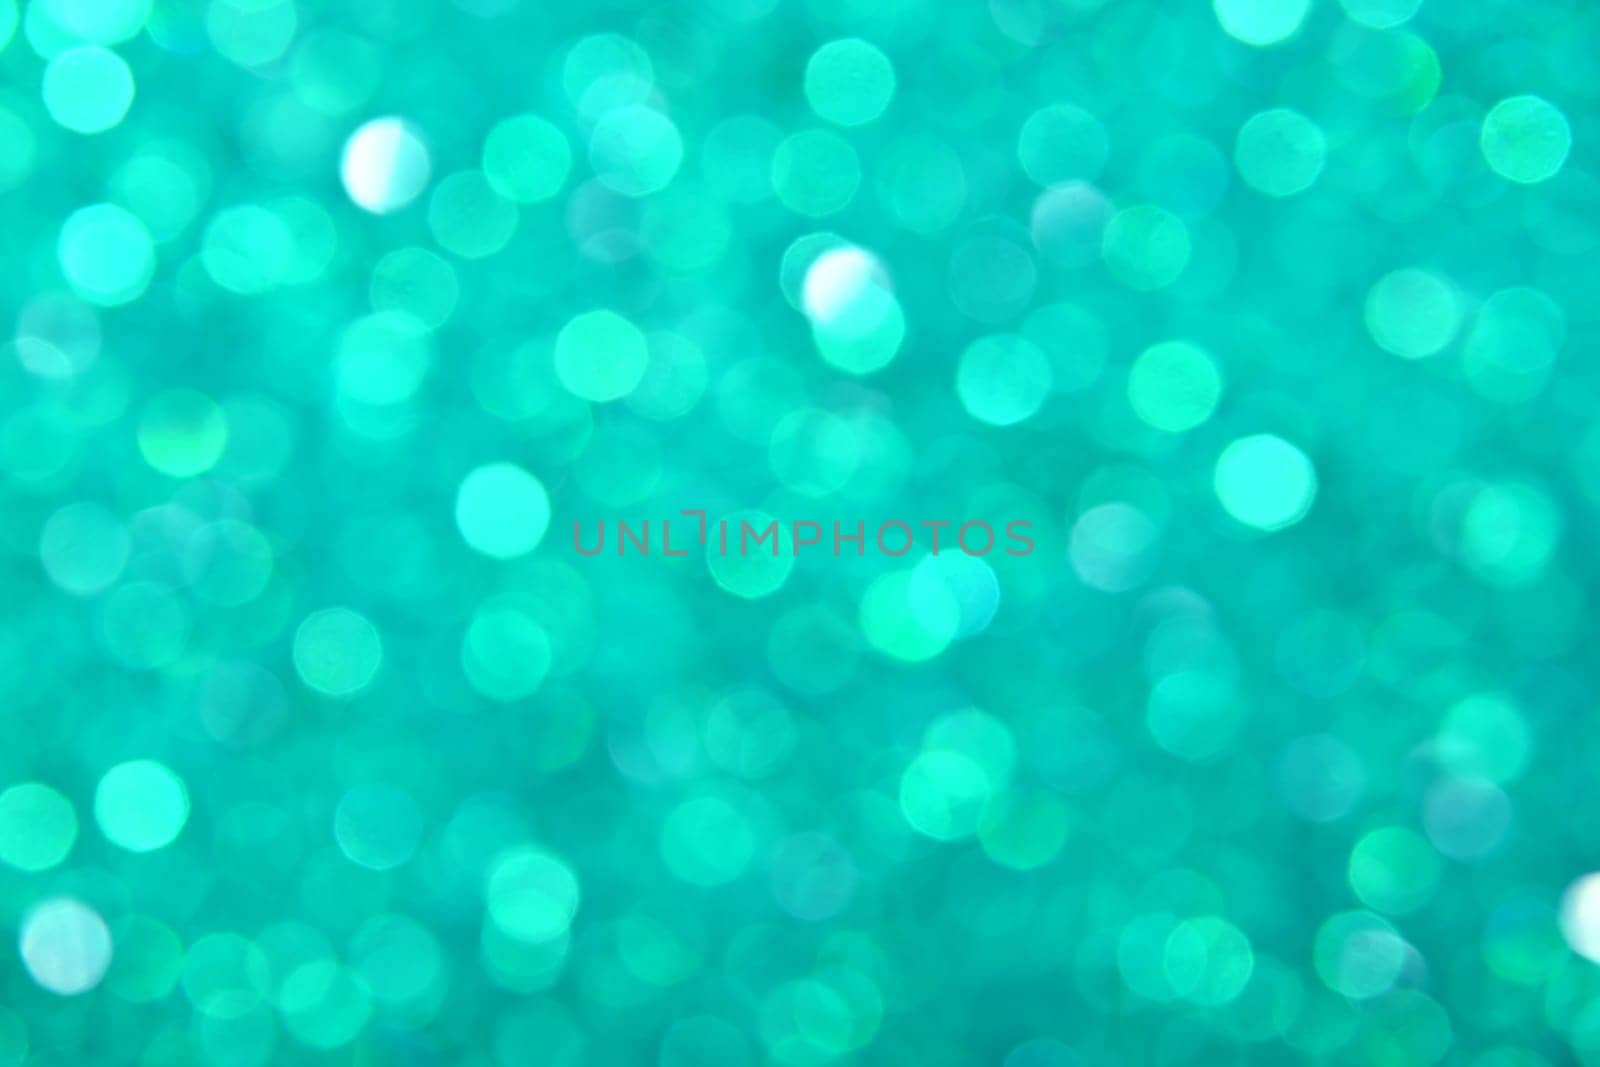 Abstract background of teal blue bokeh defocused blurred lights and glitter sparkles